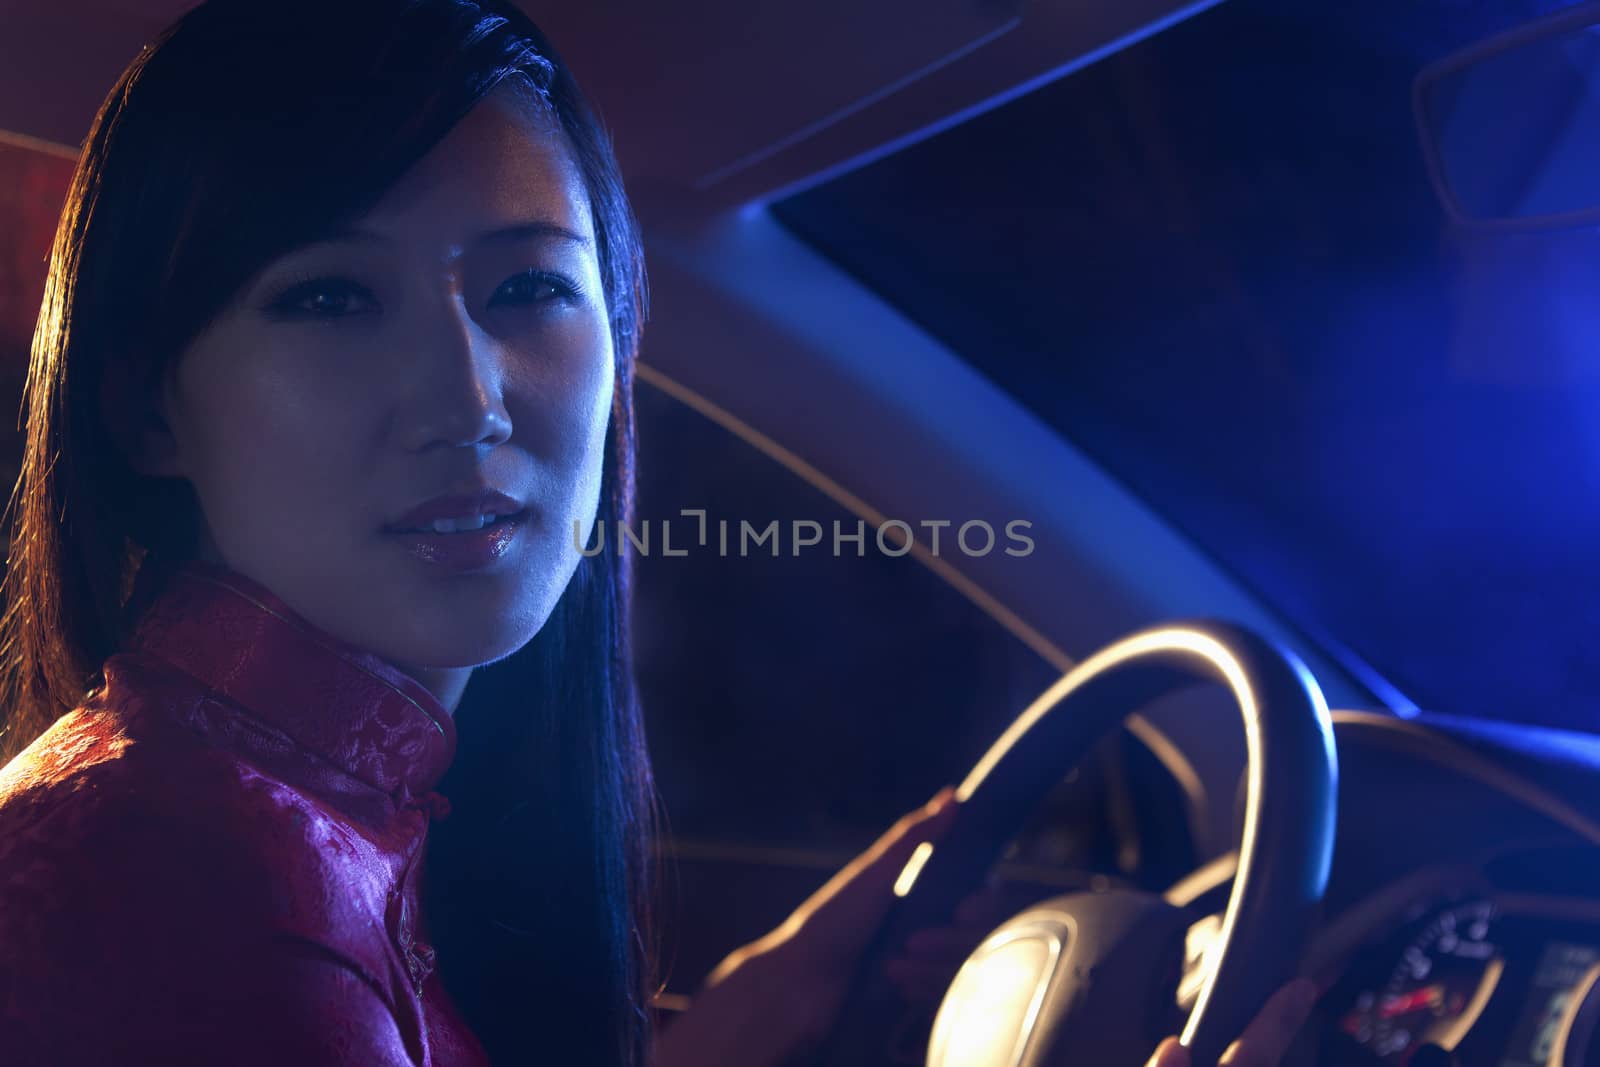 Portrait of young, beautiful woman in traditional clothing driving at night in Beijing